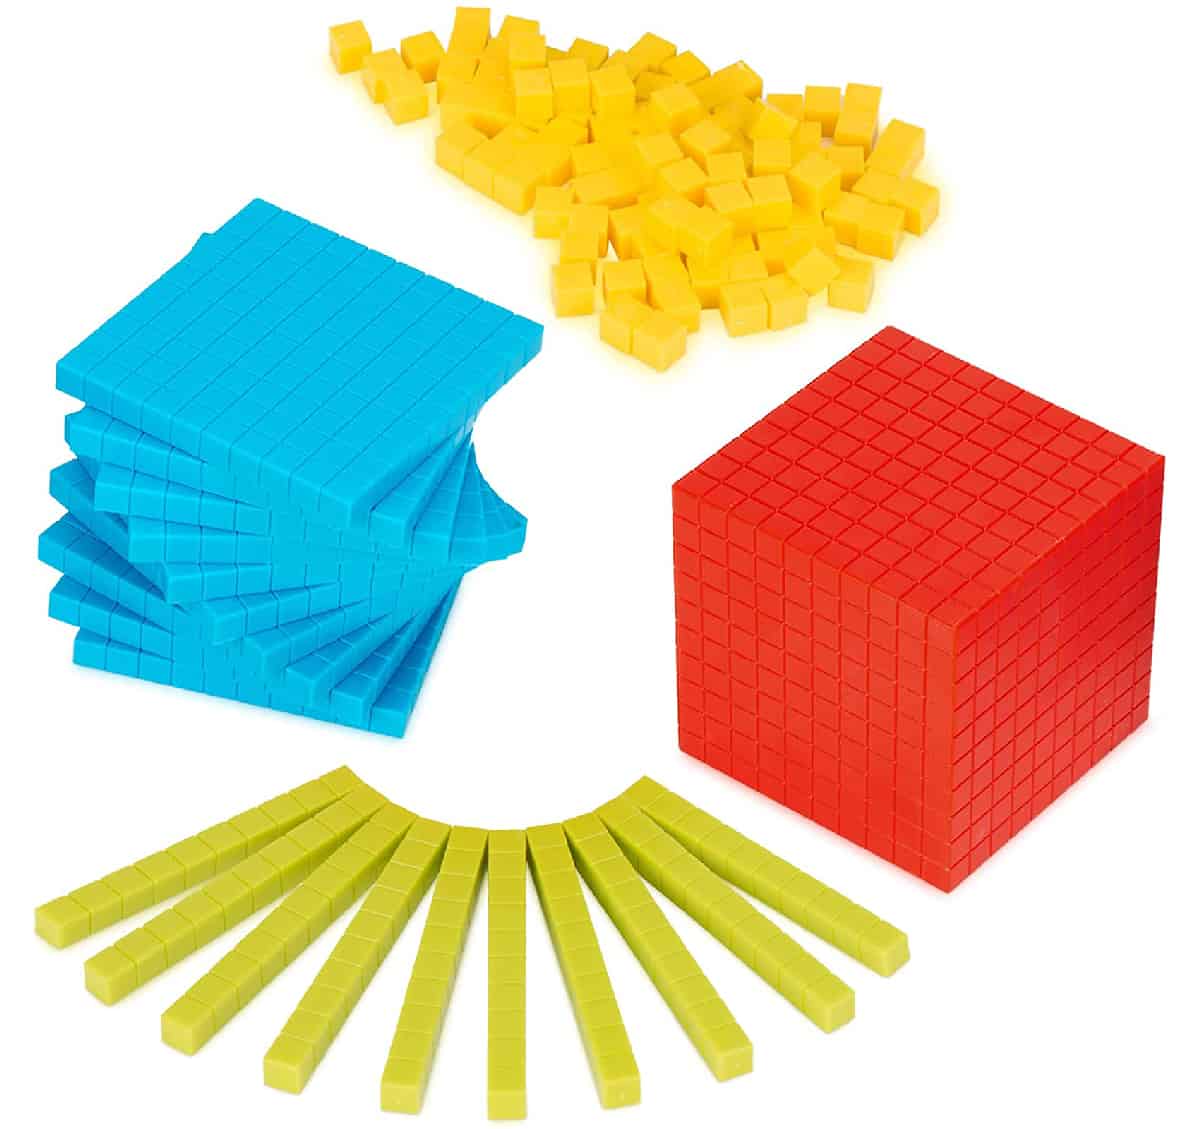 Base 10 Blocks (MB One) is a place value game to build numbers and learn place values up to 4 digits.